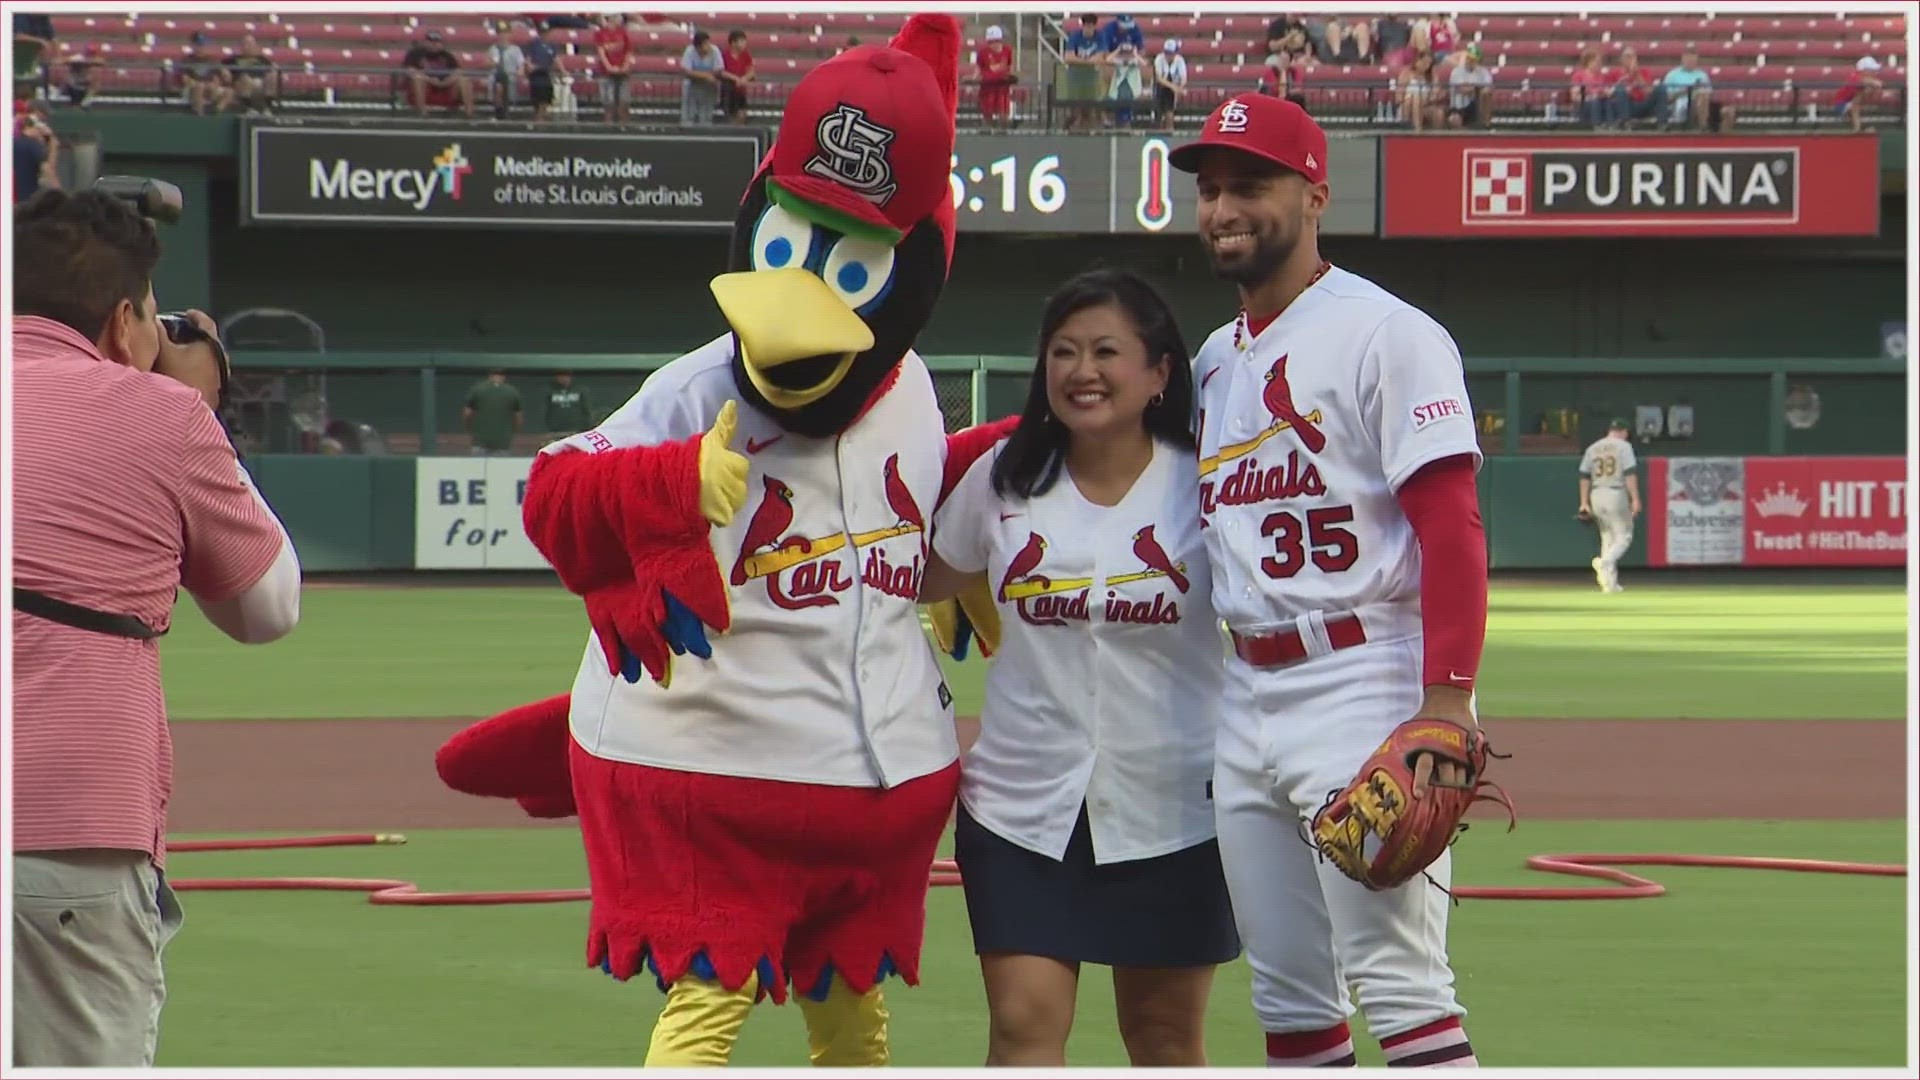 Today in St. Louis' Michelle Li threw out the first pitch Monday during AAPI Heritage Night at Busch Stadium. She was representing the Very Asian Foundation.